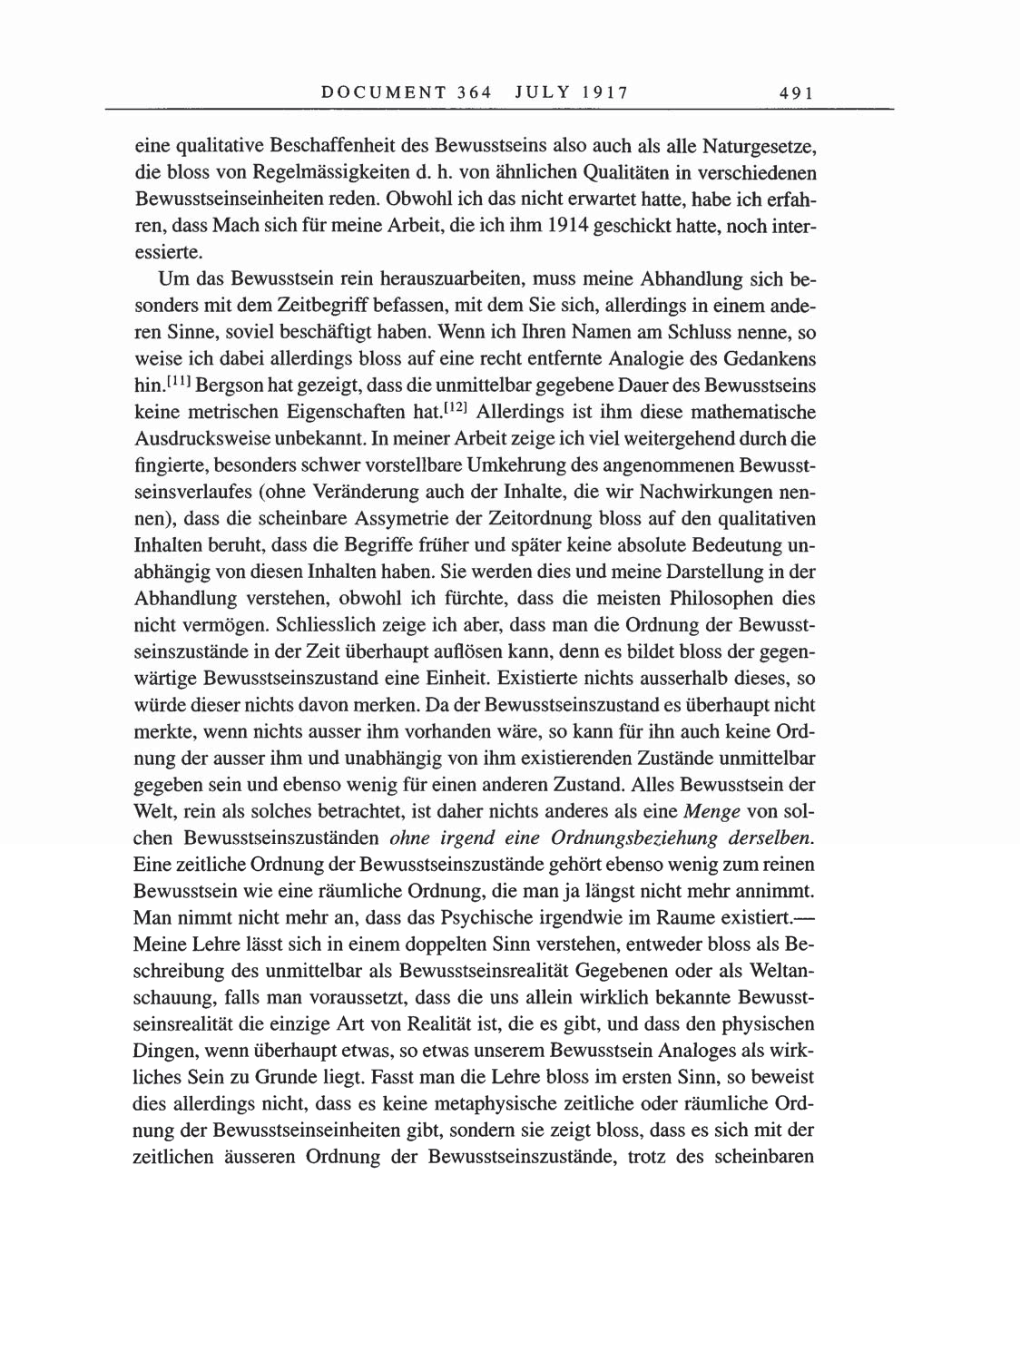 Volume 8, Part A: The Berlin Years: Correspondence 1914-1917 page 491